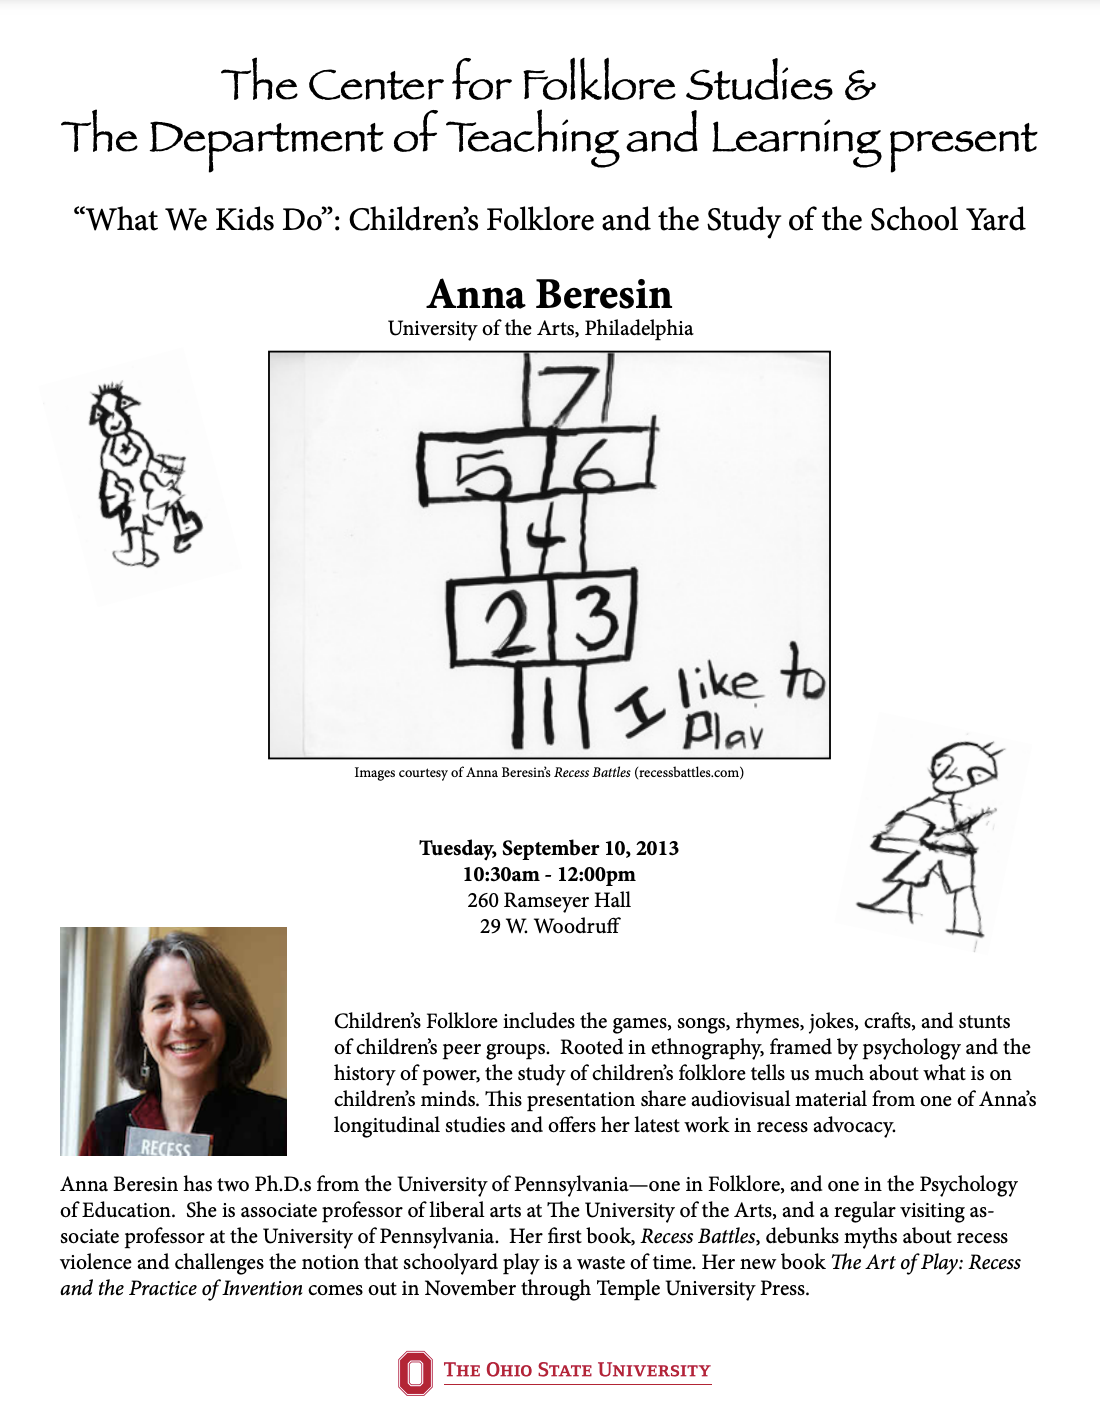 “What We Kids Do”: Children’s Folklore and the Study of the School Yard Conference Flyer